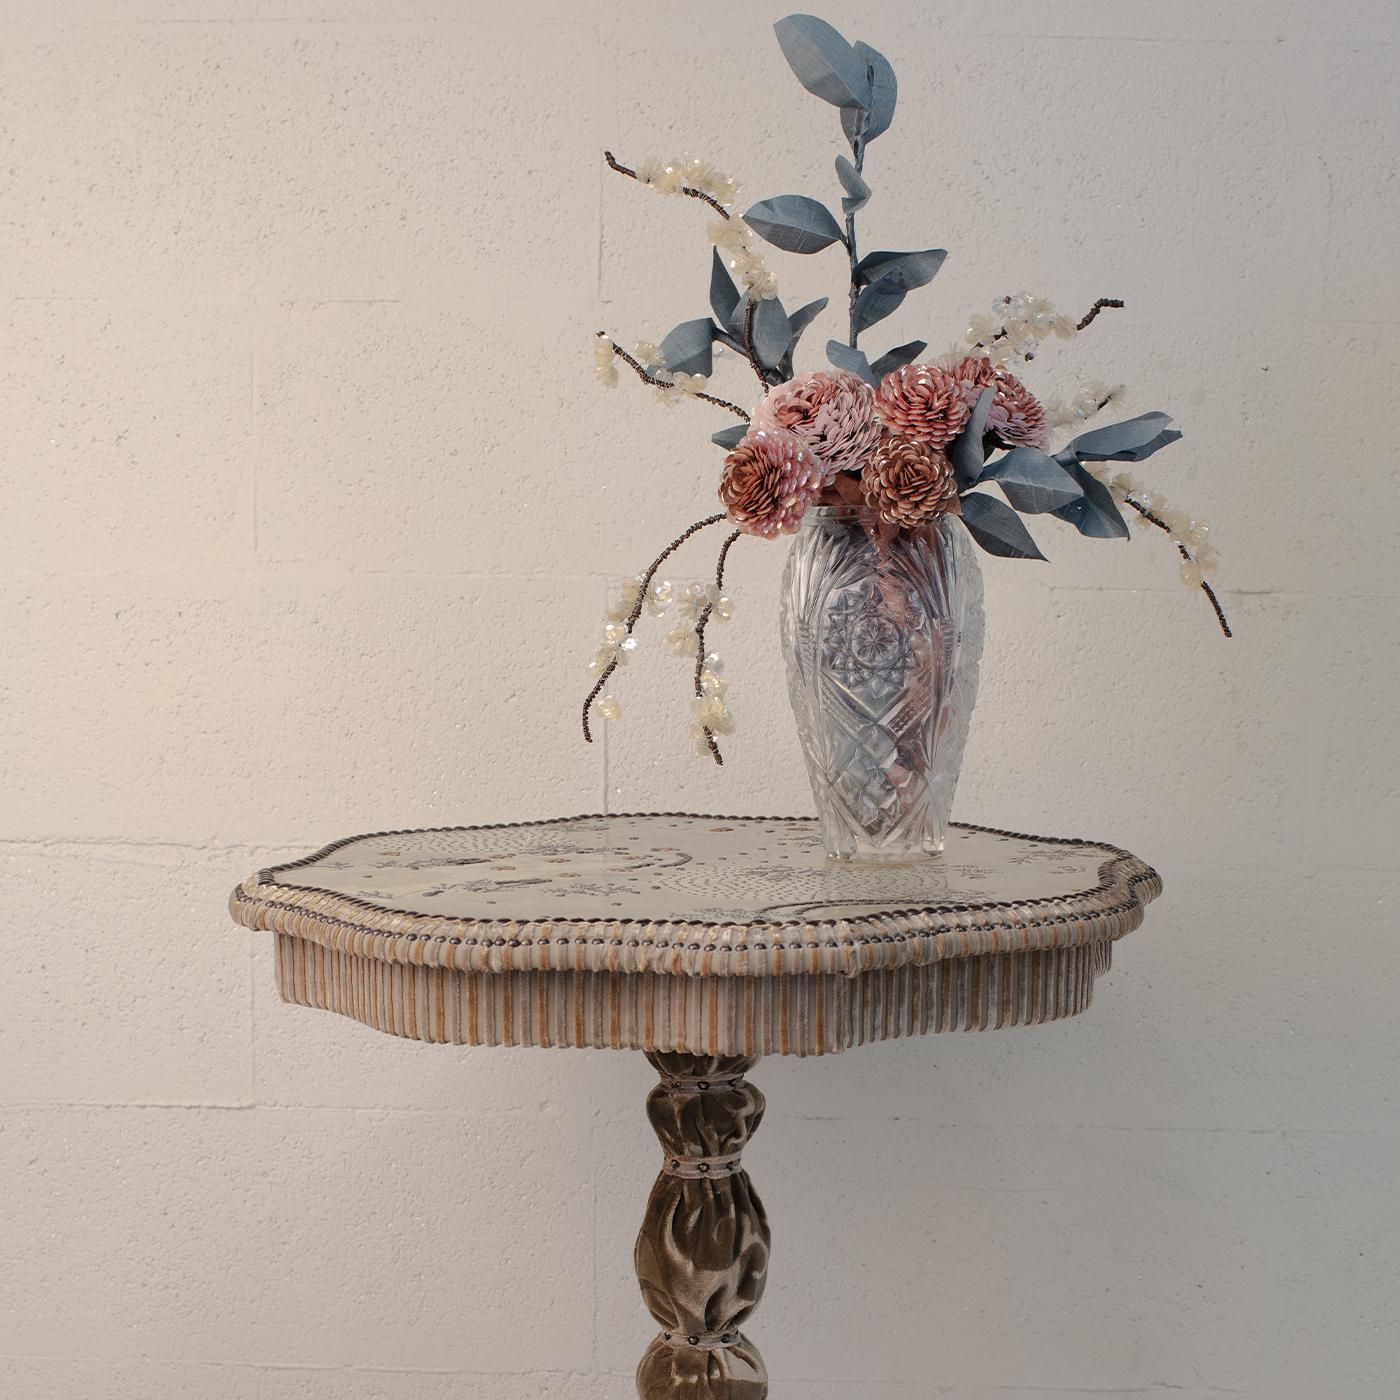 Created entirely by hand using remnants of fabric collected by Valentina Giovando, sequins and iron as supporting material, this fabulous floral arrangement includes leafy branches, white blossoms and red hydrangea in a vintage glass vase. Each